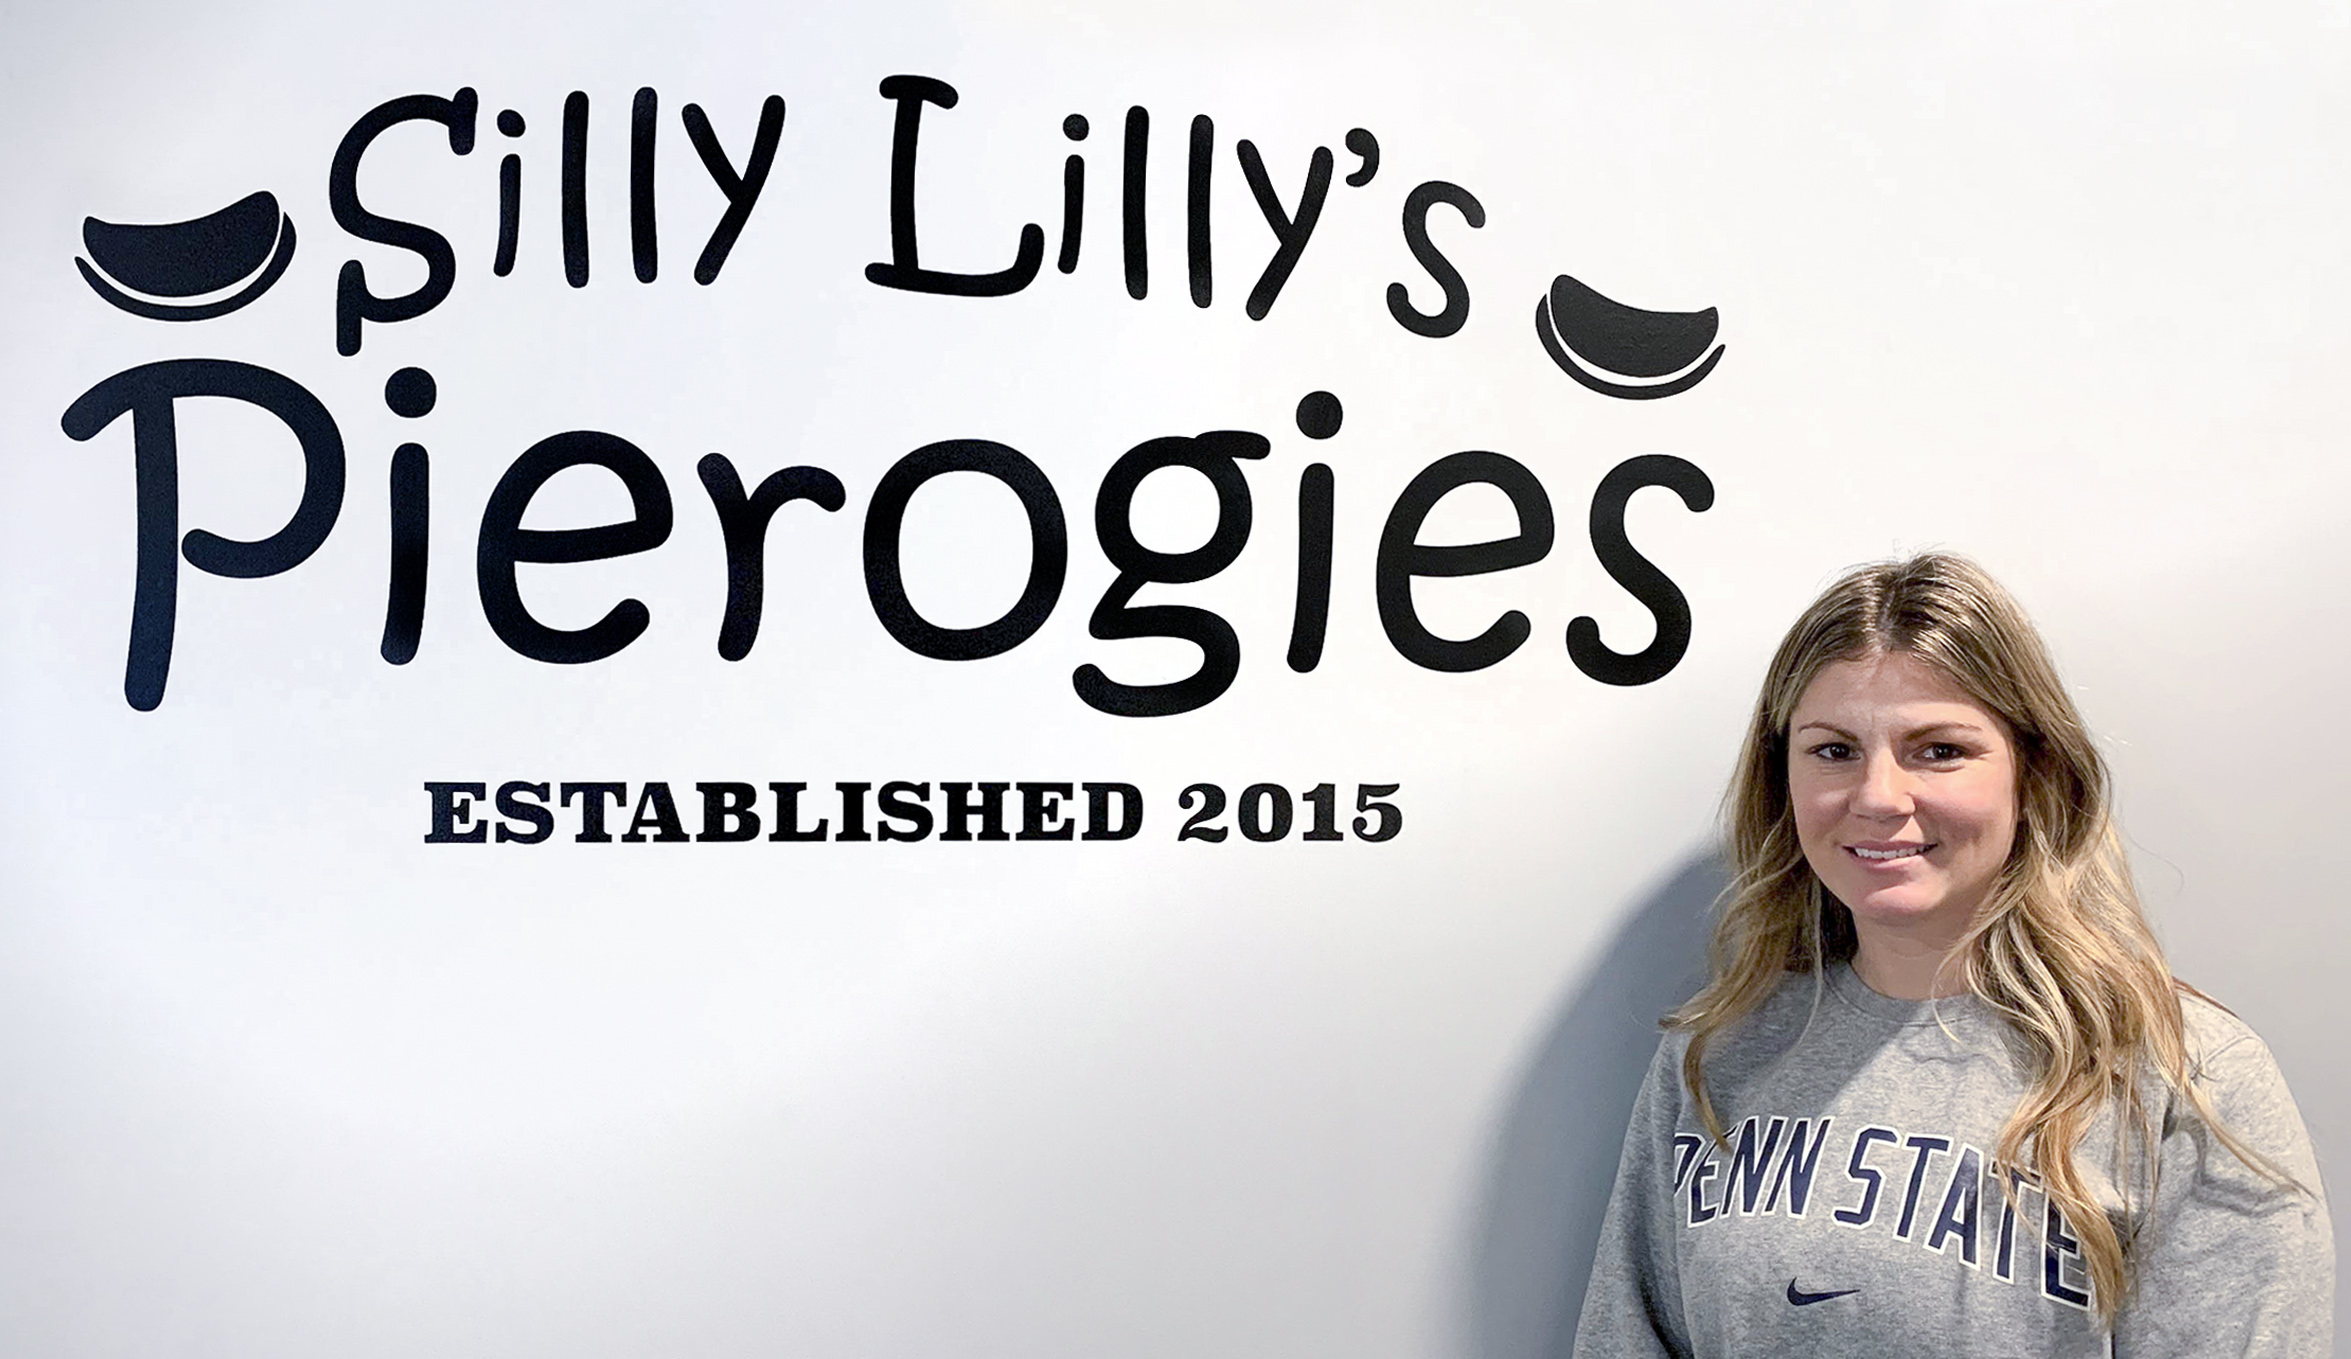 Nicole Jankowski, wearing a Penn State sweatshirt, stands beside the logo for her company, Silly Lilly's Pierogies, which is printed on a wall.